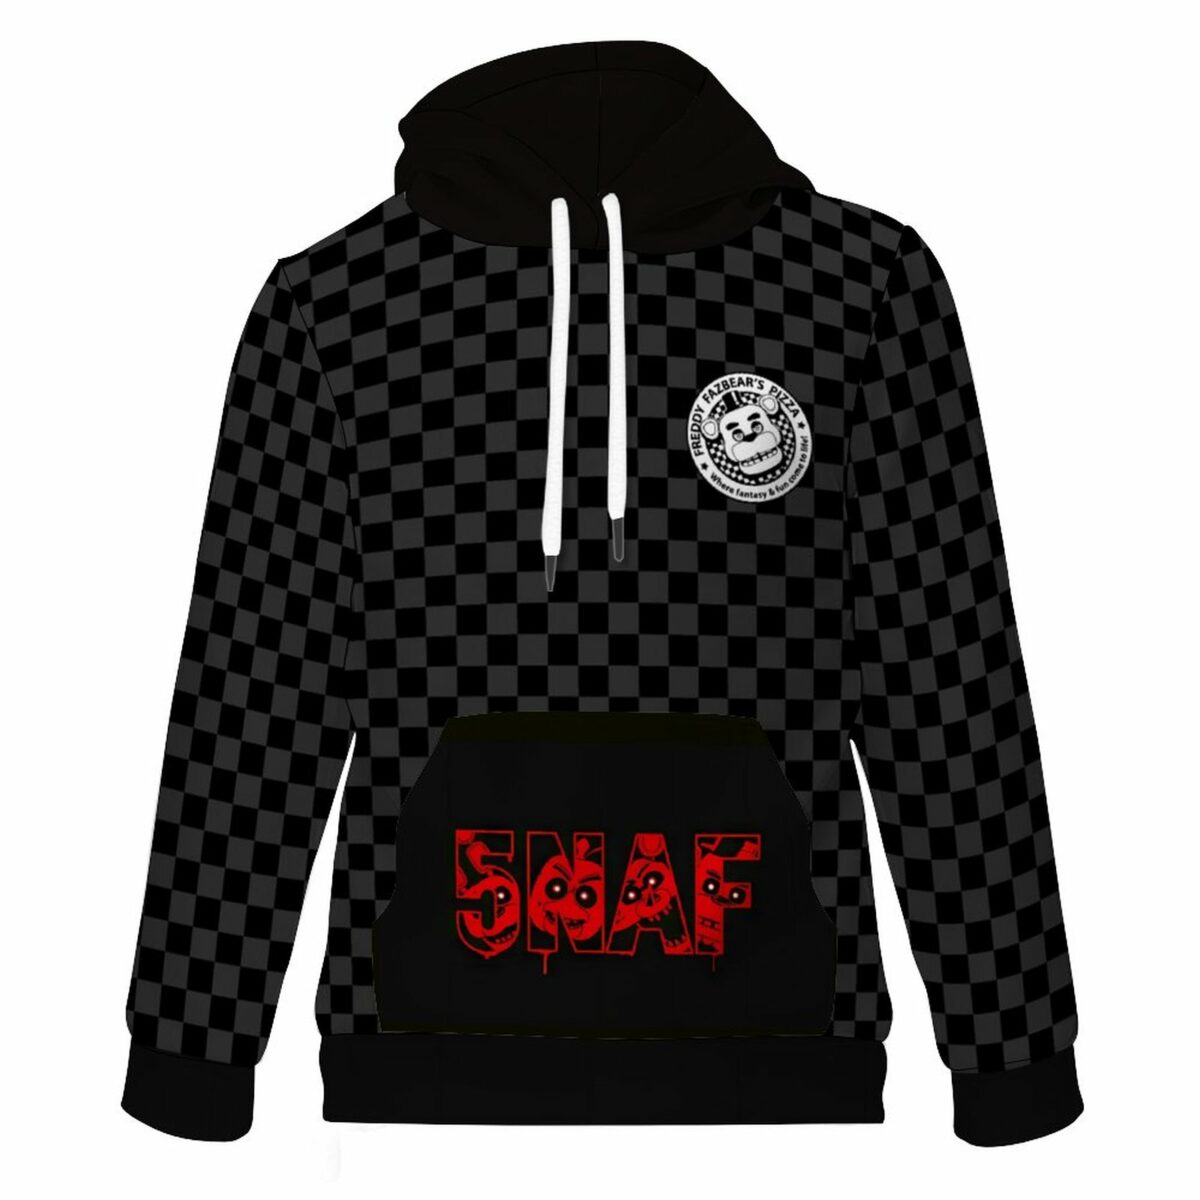 Five Nights At Freddy’s 230gsm Hoodie for Kids (All-Over Printing) Cool Kiddo 24